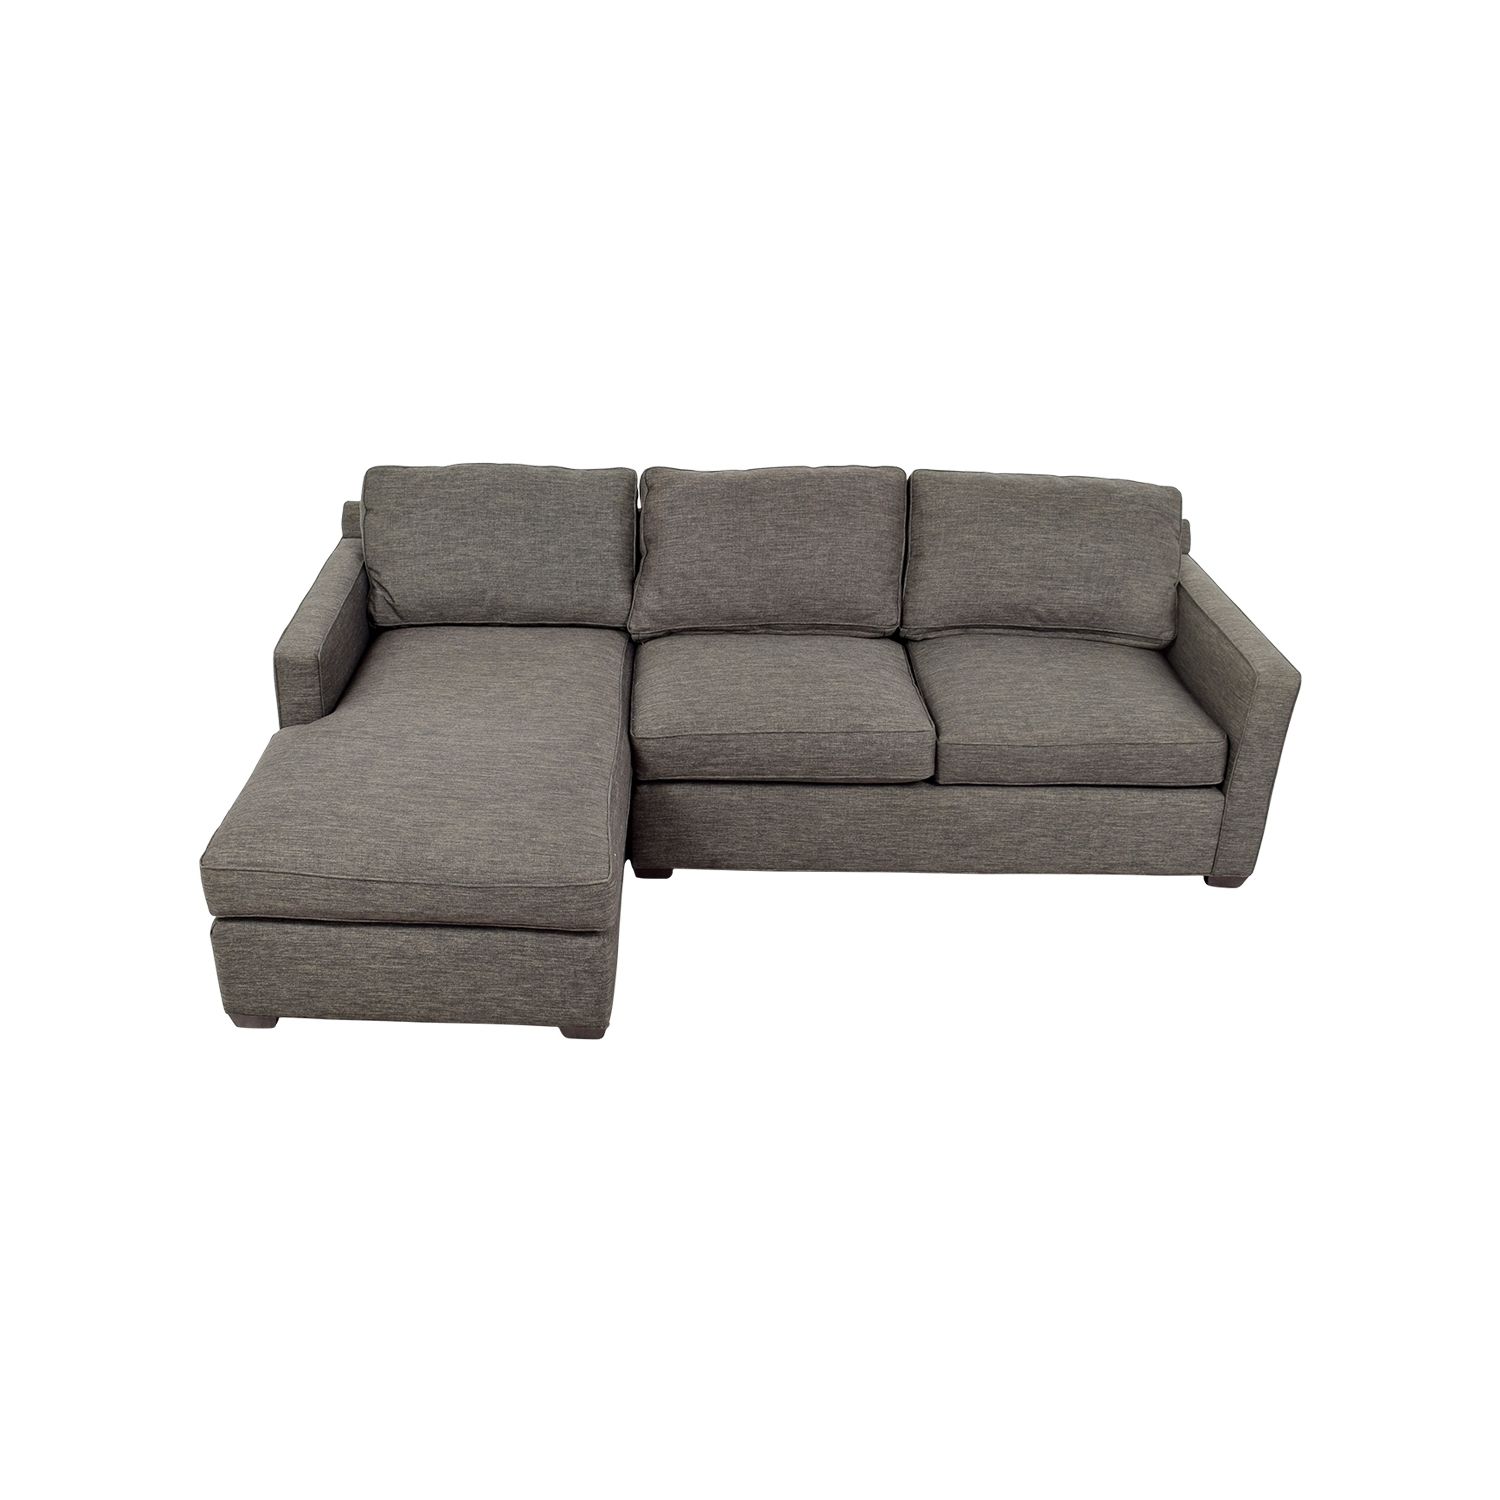 [%63% Off – Crate And Barrel Crate & Barrel Davis Grey Chaise With Regard To Famous Crate And Barrel Chaises|Crate And Barrel Chaises Regarding 2017 63% Off – Crate And Barrel Crate & Barrel Davis Grey Chaise|Favorite Crate And Barrel Chaises Pertaining To 63% Off – Crate And Barrel Crate & Barrel Davis Grey Chaise|Most Up To Date 63% Off – Crate And Barrel Crate & Barrel Davis Grey Chaise Inside Crate And Barrel Chaises%] (View 11 of 15)